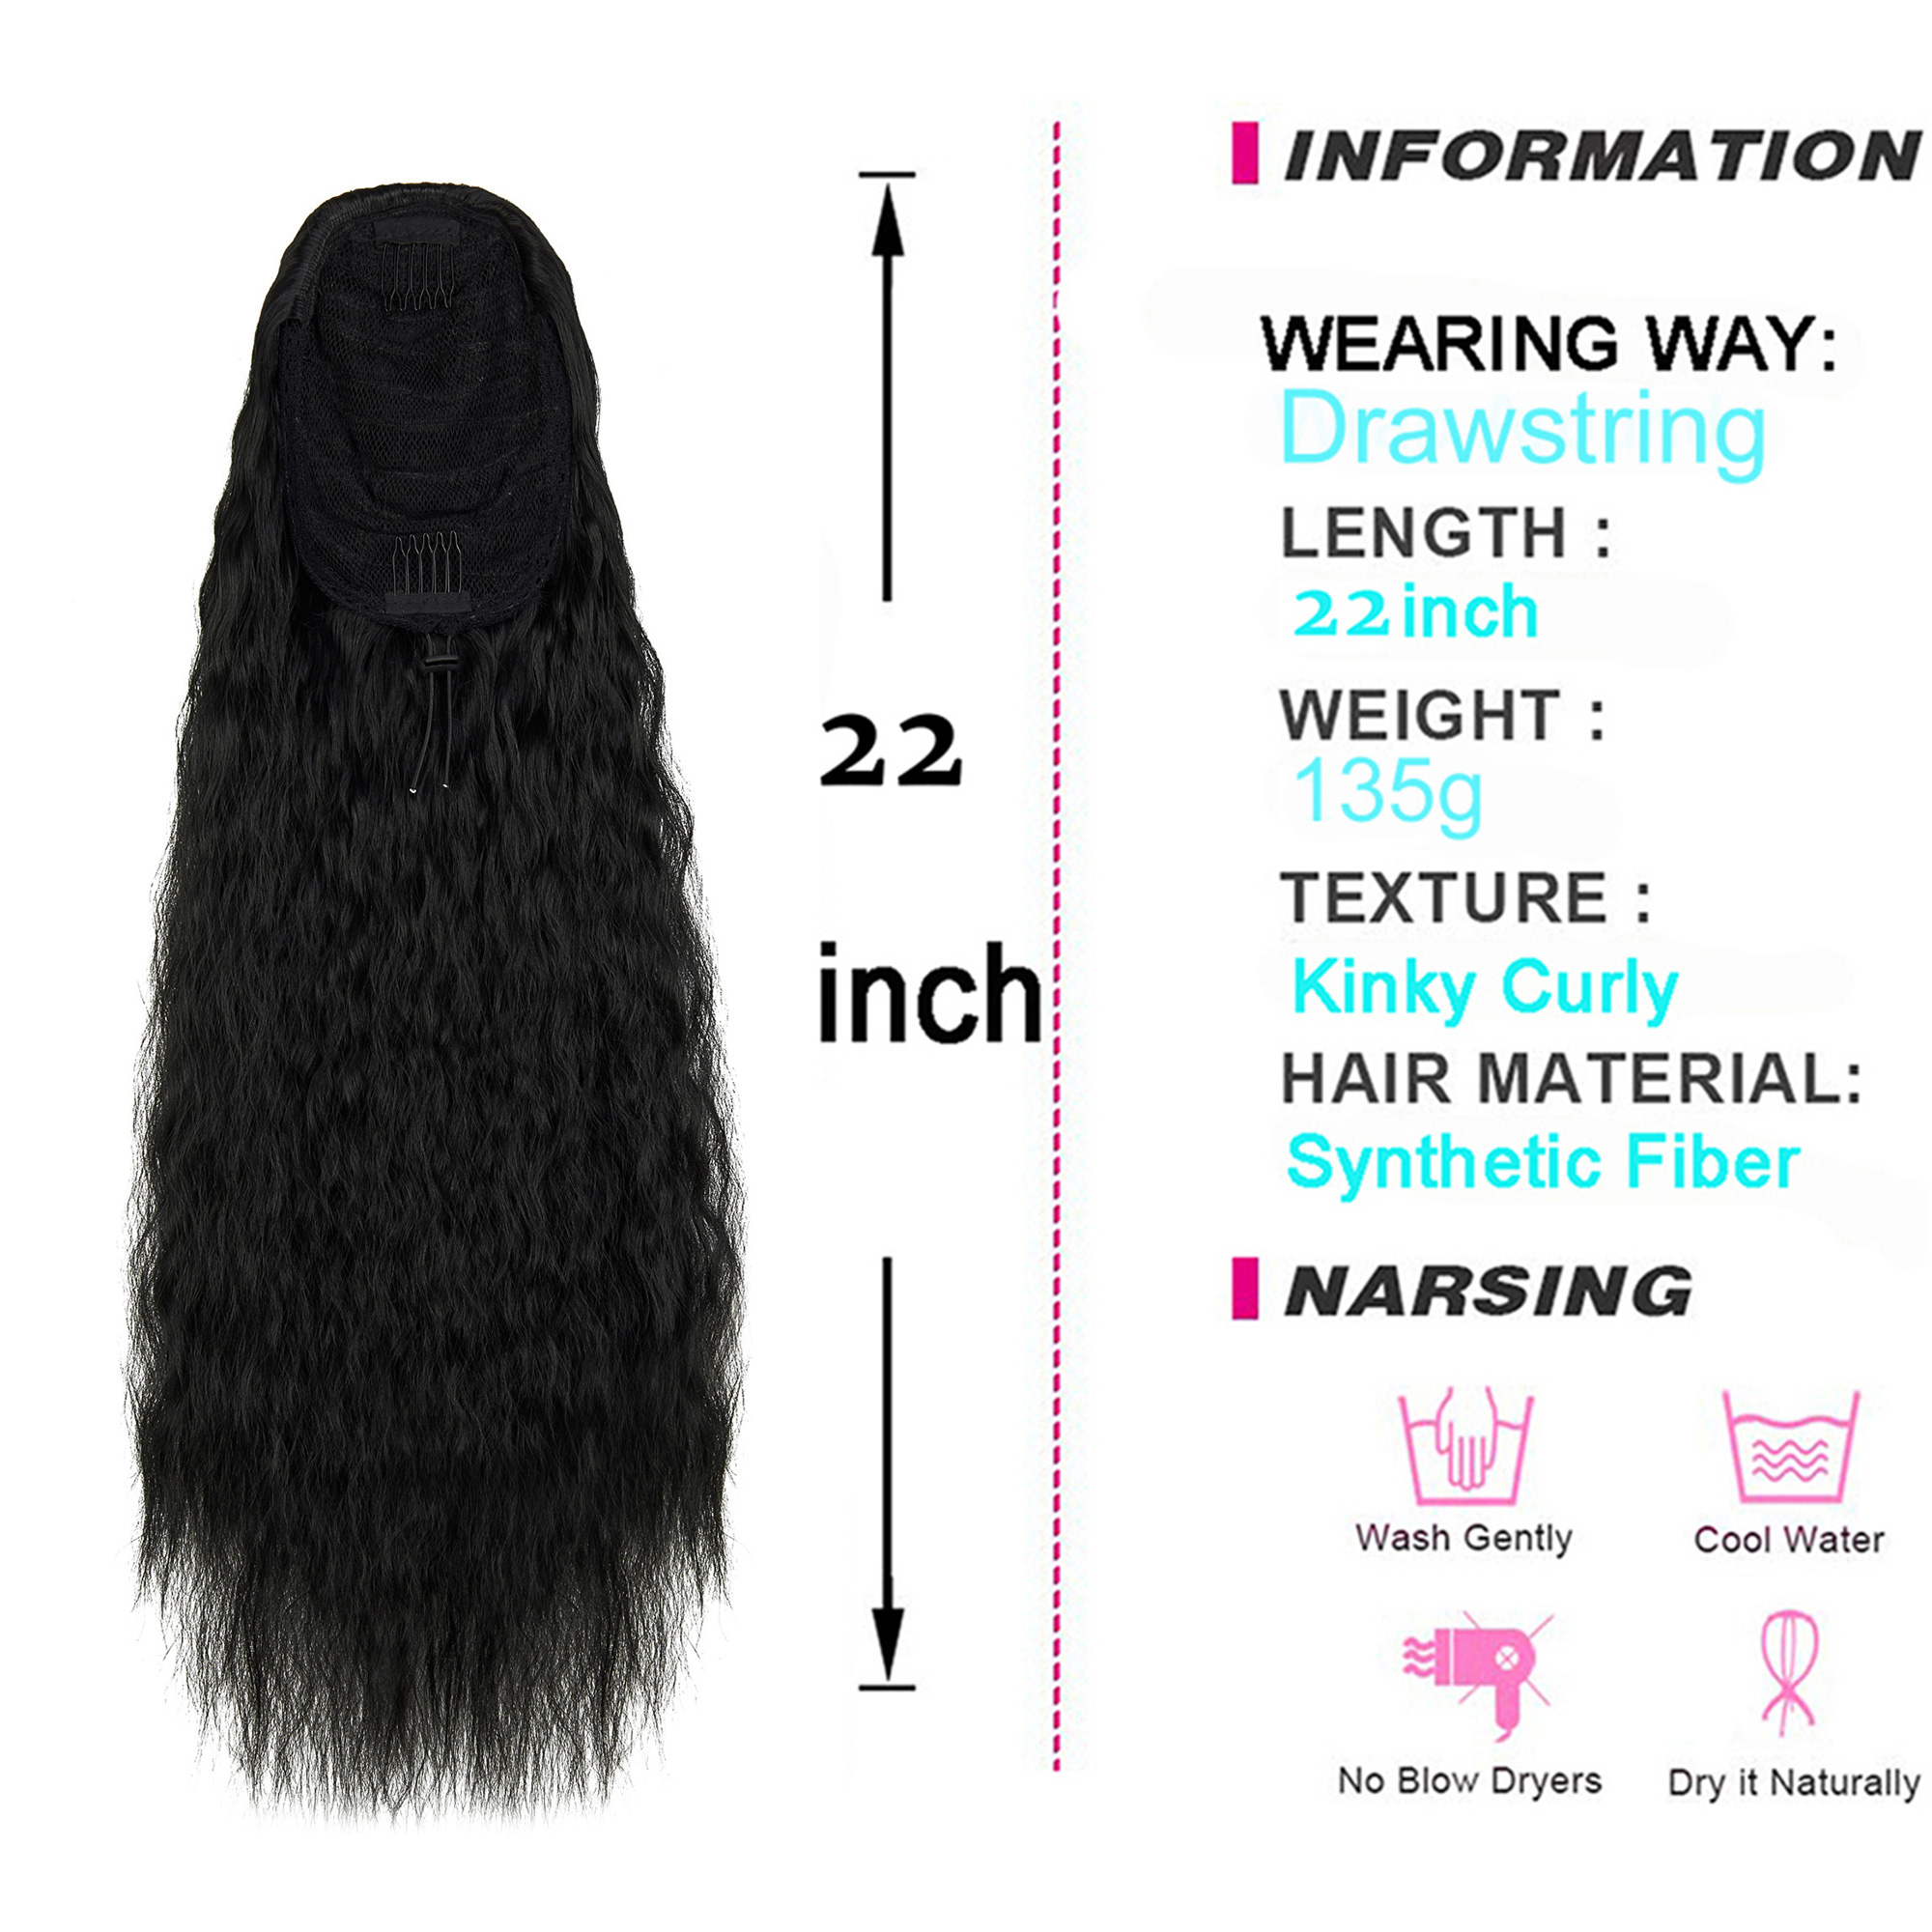 Long KiSAYFUTy Straight Drawstring Ponytail for Black Women, Curly Hair 24 Inch 130g Clip in Ponytail Extension Curly Drawstring Ponytail - image 4 of 8